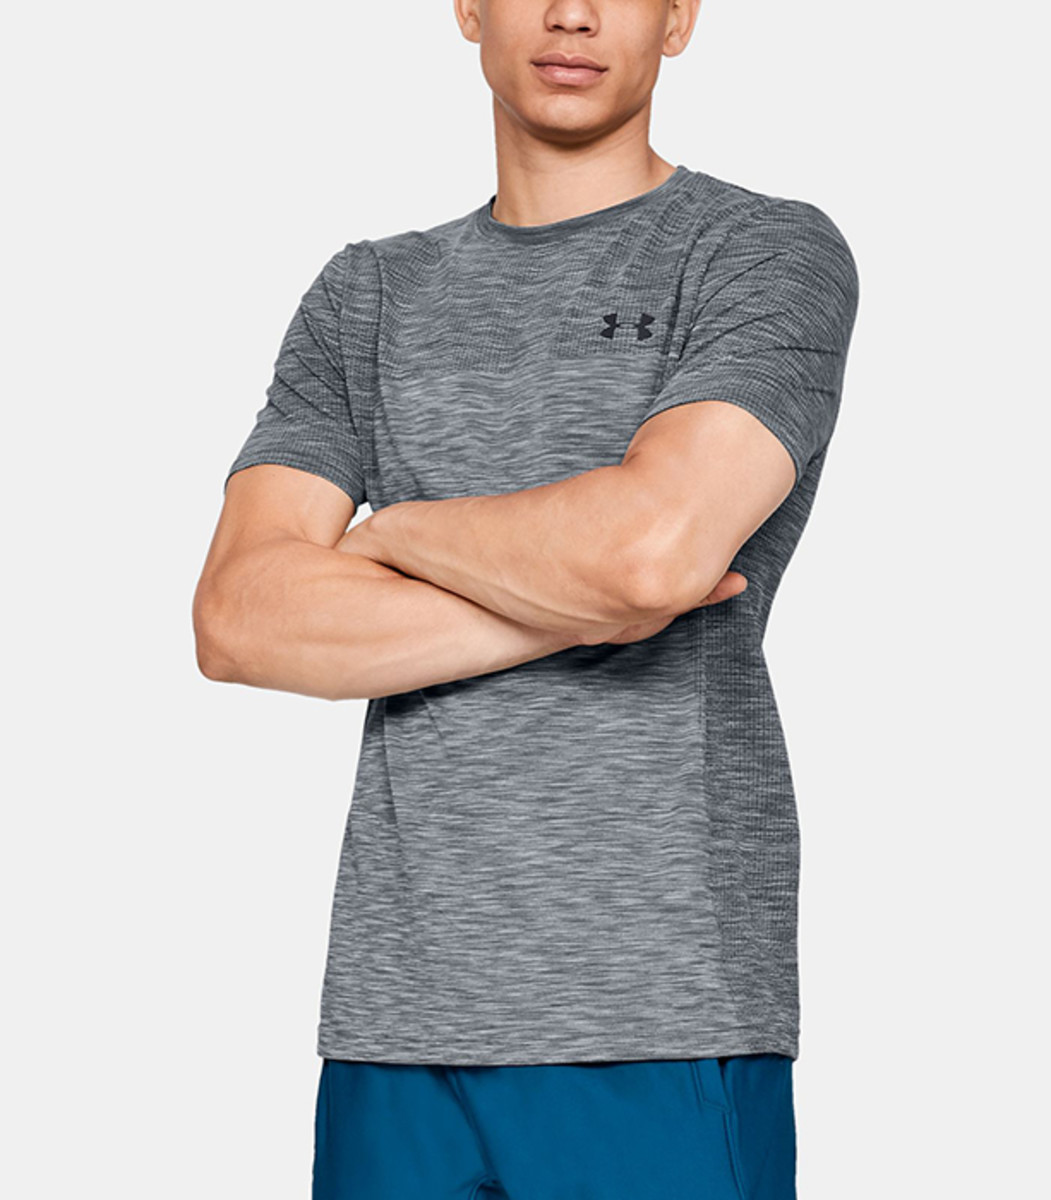 under-armour-tshirt-fathers-day.jpg